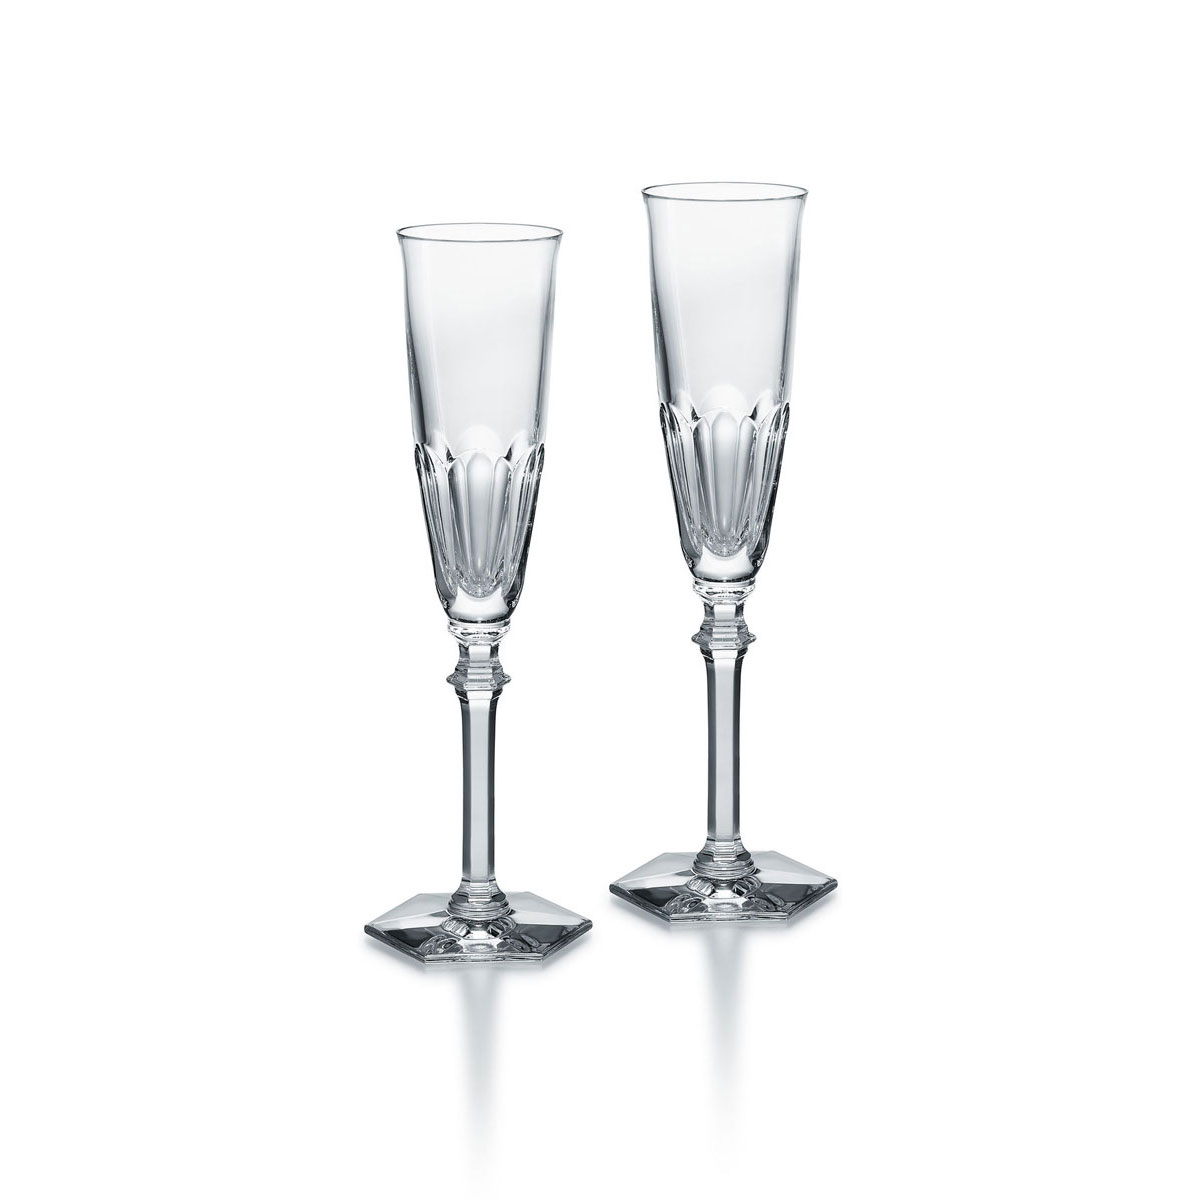 Baccarat Crystal, Harcourt Eve Champagne Toasting Crystal Flute, Pair